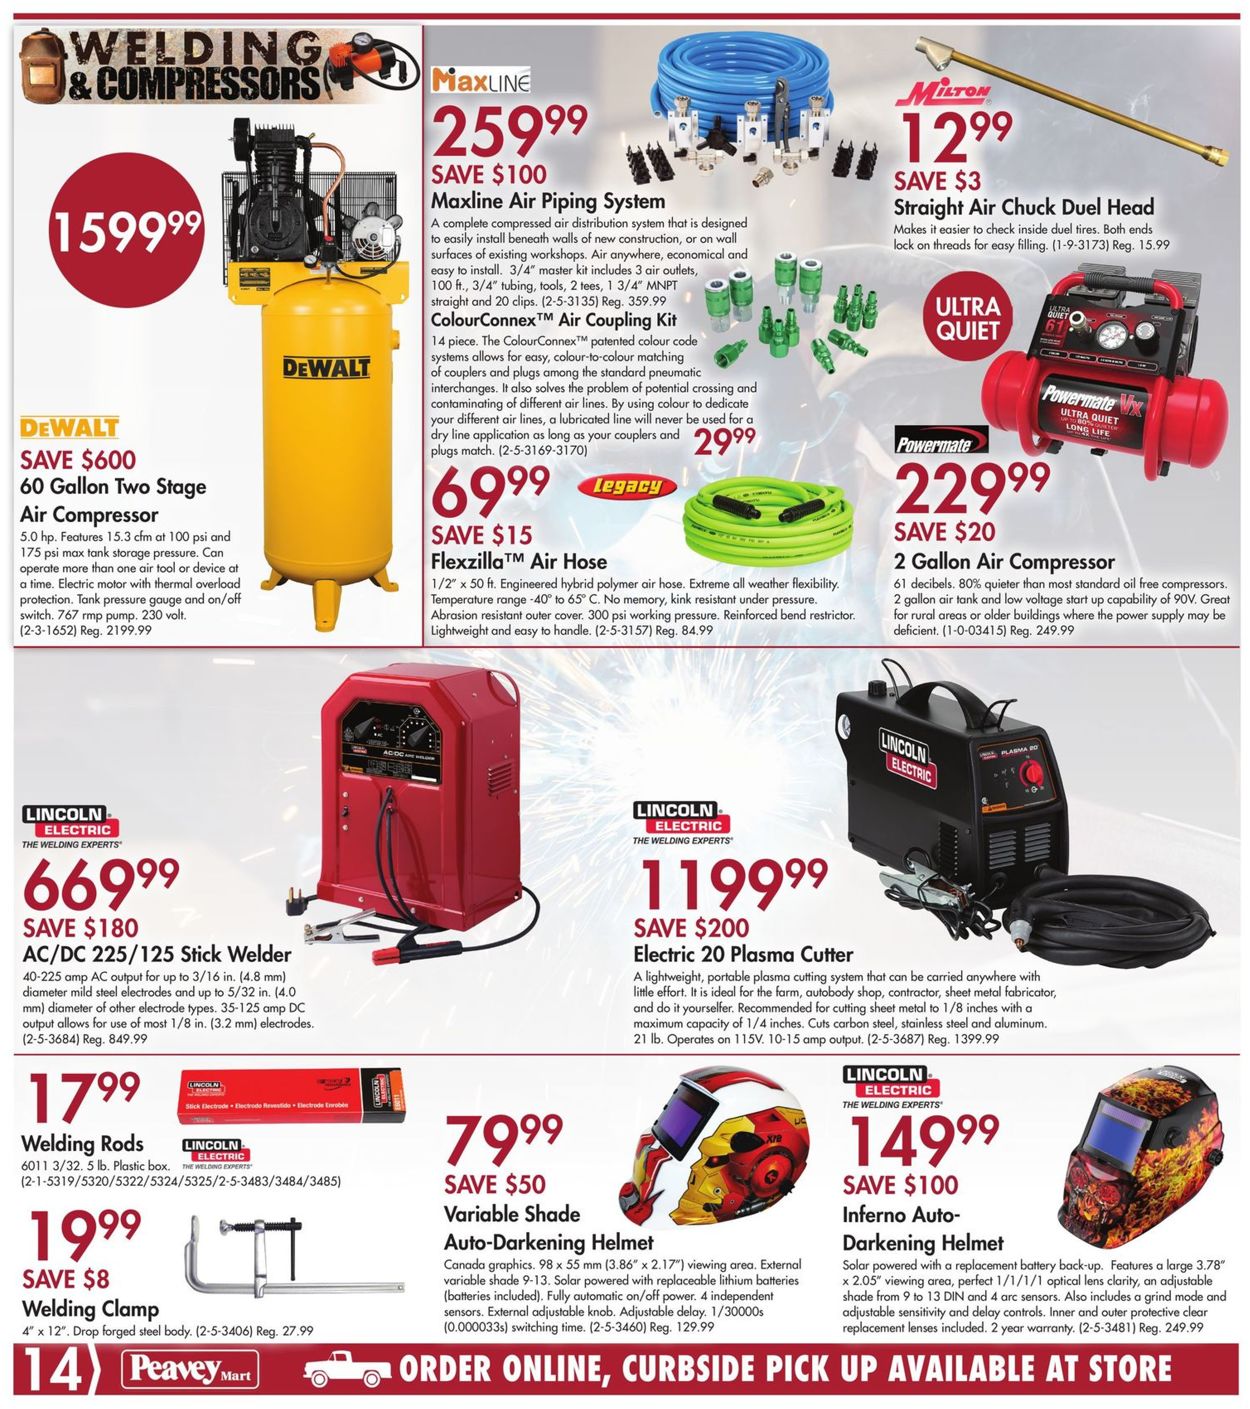 Peavey Mart Flyer from 09/24/2020